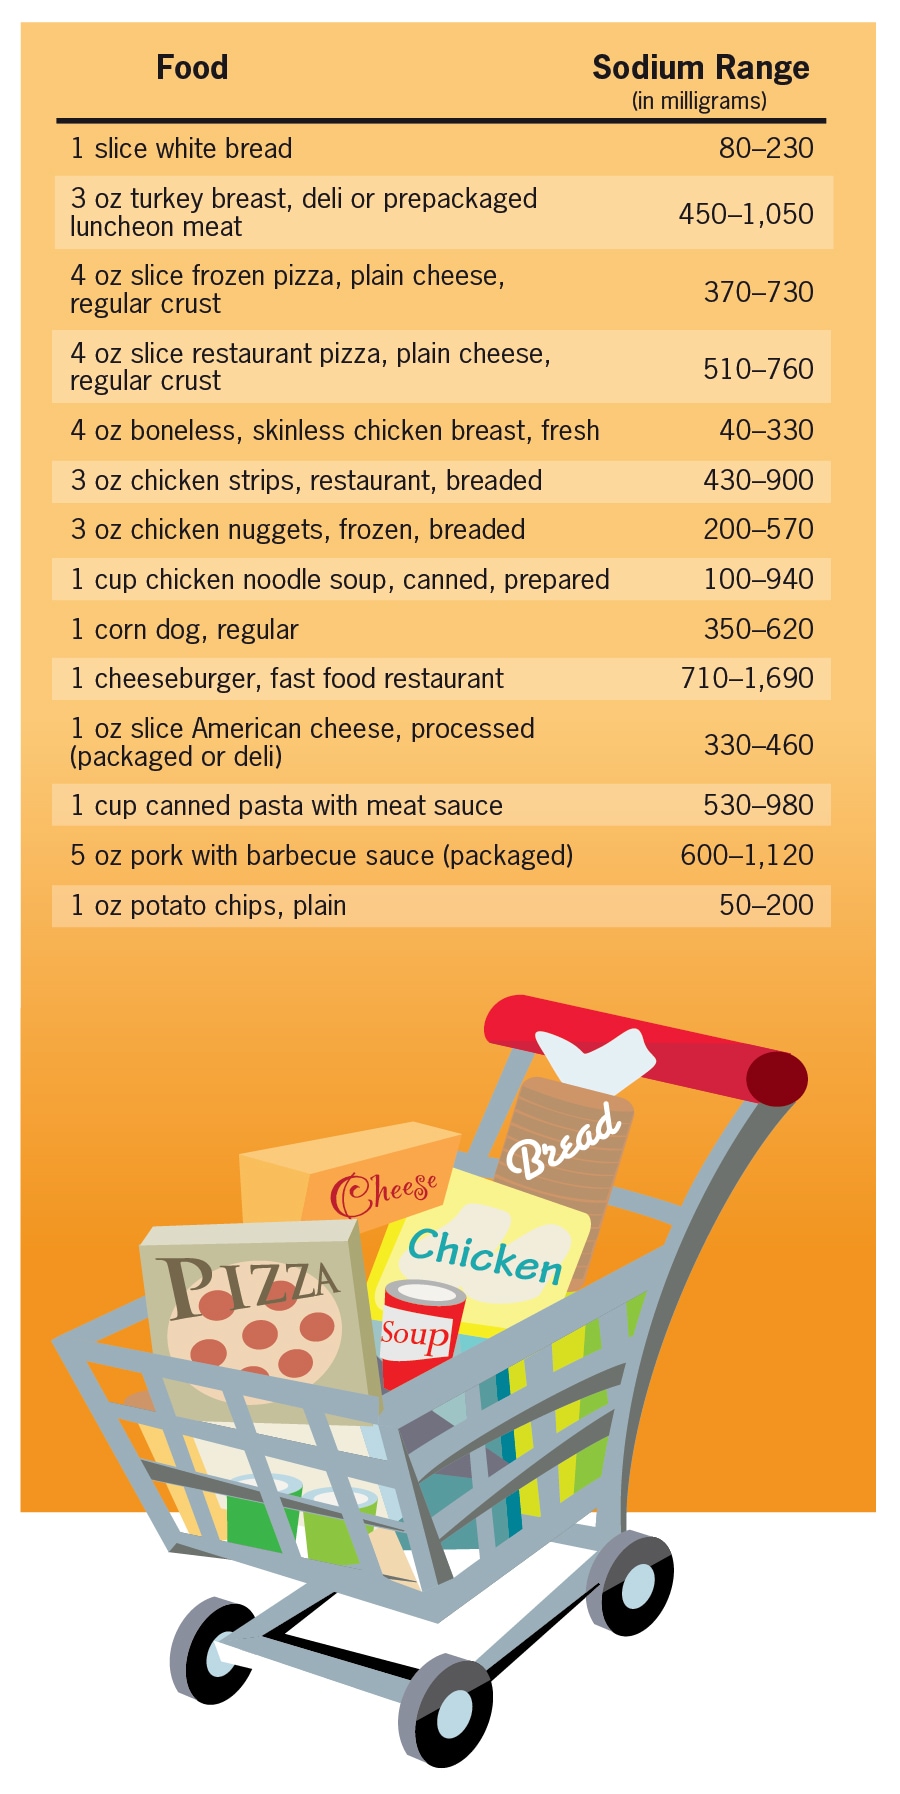 Sodium levels of the same food can vary widely, so choose wisely. The chart includes the following examples: 1 slice of white bread contains 80–230 mg of sodium; 3 oz turkey breast, deli or prepackaged lunch meat contains 450–1,050 mg; 4 oz slice frozen pizza, plain cheese, regular crust contains 370–730 mg; 4 oz slice restaurant pizza, plain cheese, regular crust, contains 510–760 mg; 4 oz boneless, skinless chicken breast, fresh contains 40–330mg; 3 oz chicken strips, restaurant, breaded contains 430–900 mg; 3 oz chicken nuggets, frozen and breaded contains 200–570 mg; 1 cup chicken noodle soup, canned, prepared contains 100–940 mg; 1 corn dog, regular contains 350–620 mg; 1 cheeseburger from a fast food restaurant contains 710–1,690 mg; 1 oz slice of American cheese, processed (packaged or deli) contains 330–460 mg; 1 cup canned pasta with meat sauce contains 530–980 mg; 5 oz pork with barbeque sauce (packaged) contains 600–1,120 mg; 1 oz plain potato chips contains 50–200 mg.